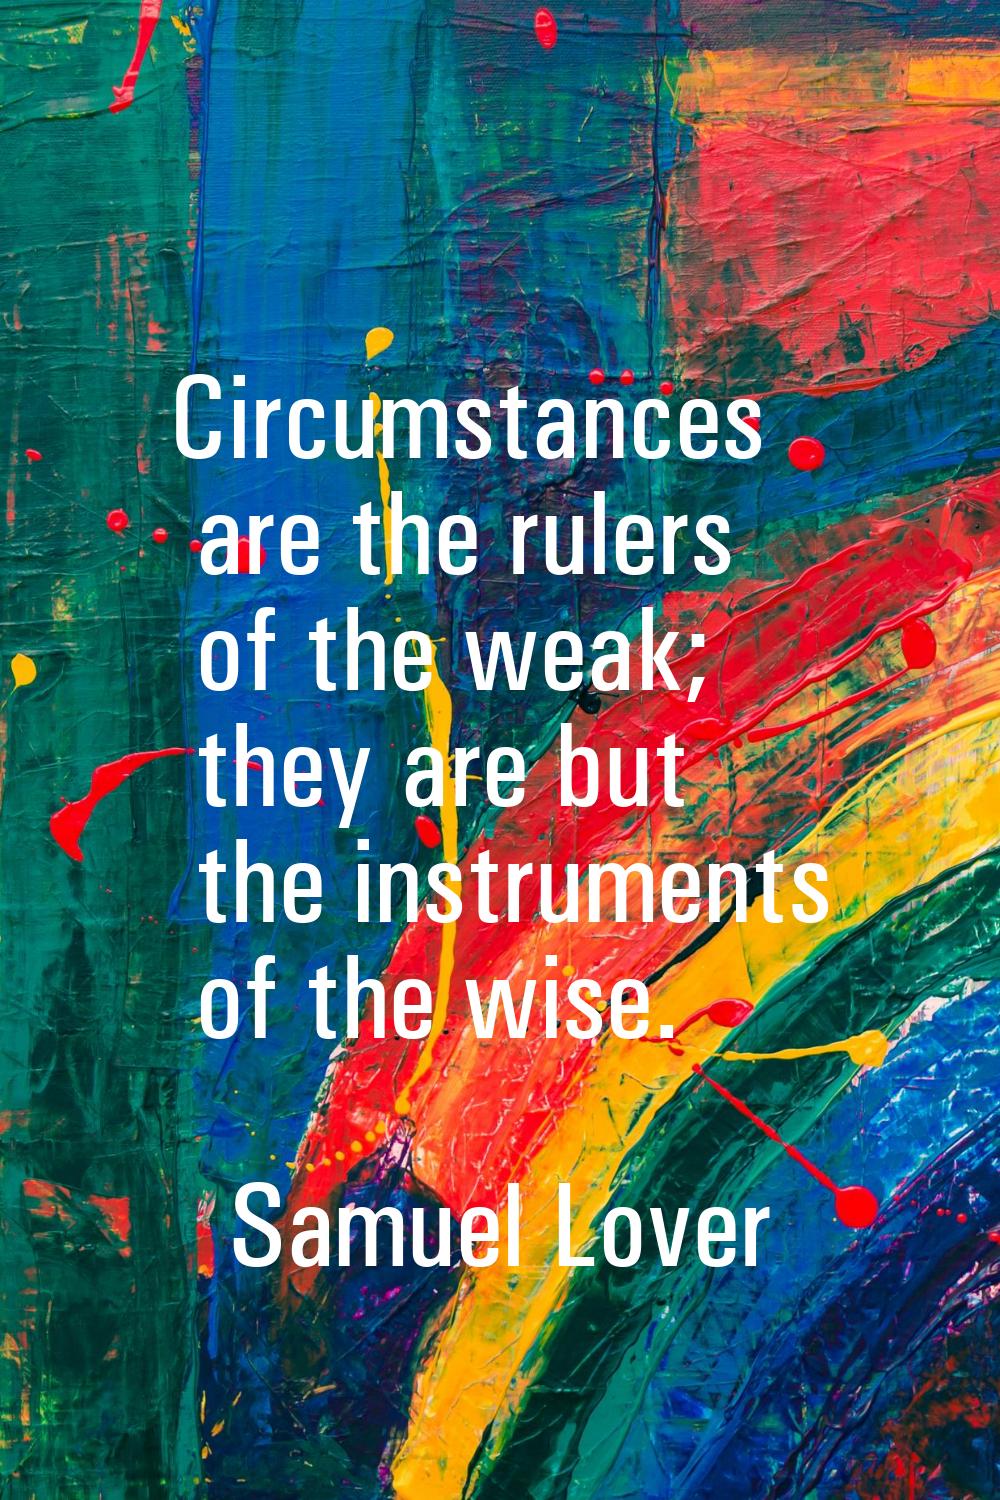 Circumstances are the rulers of the weak; they are but the instruments of the wise.